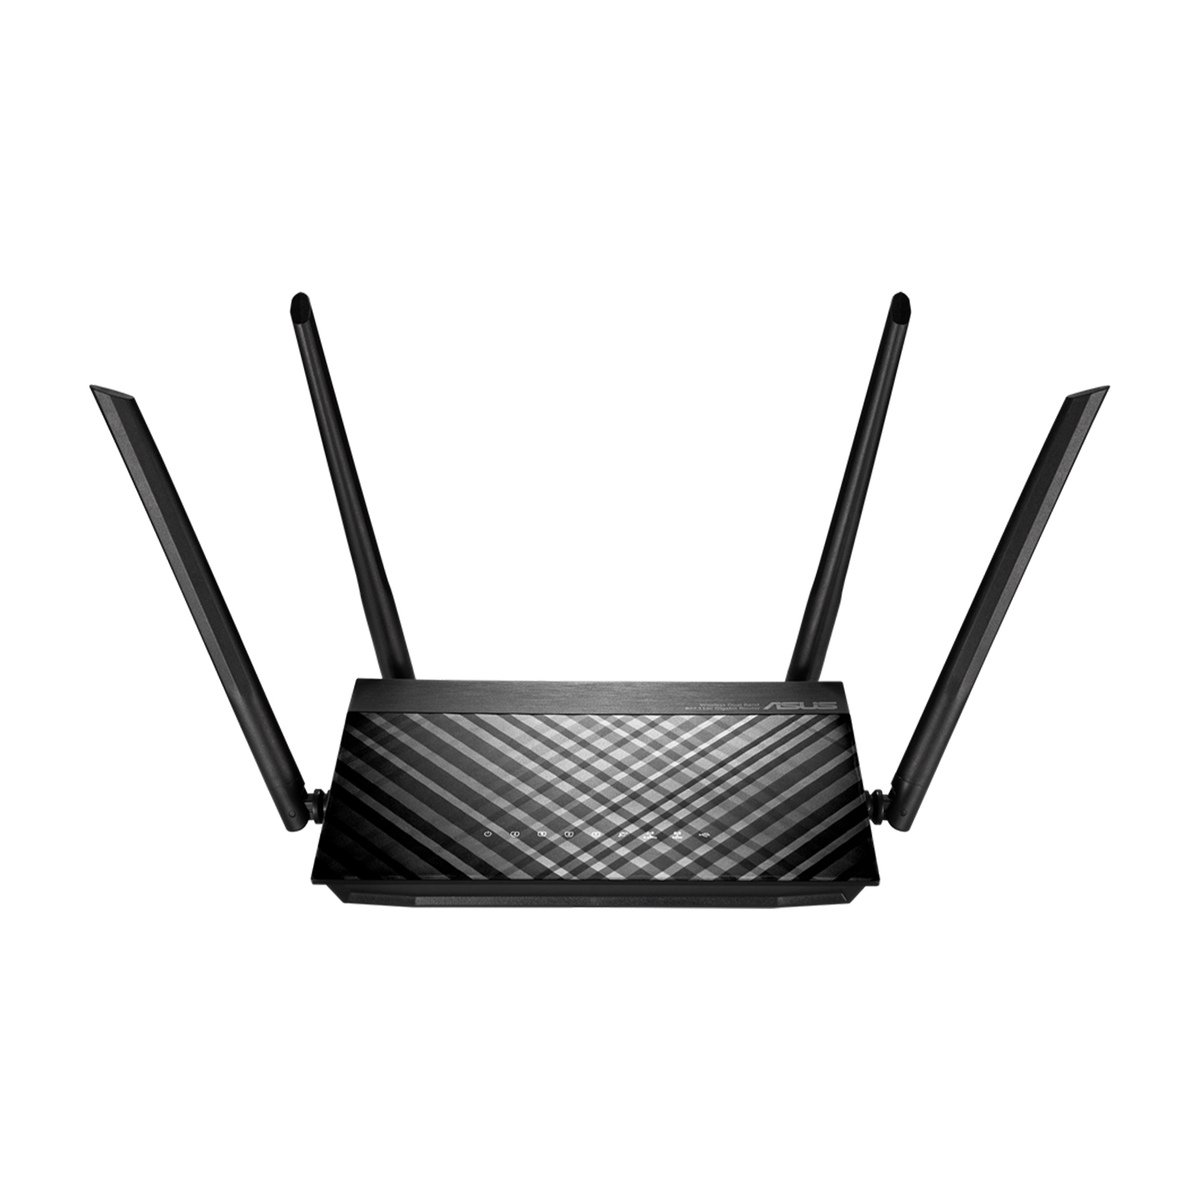 ASUS RT-AC58U AC1300 Dual Band WiFi Router